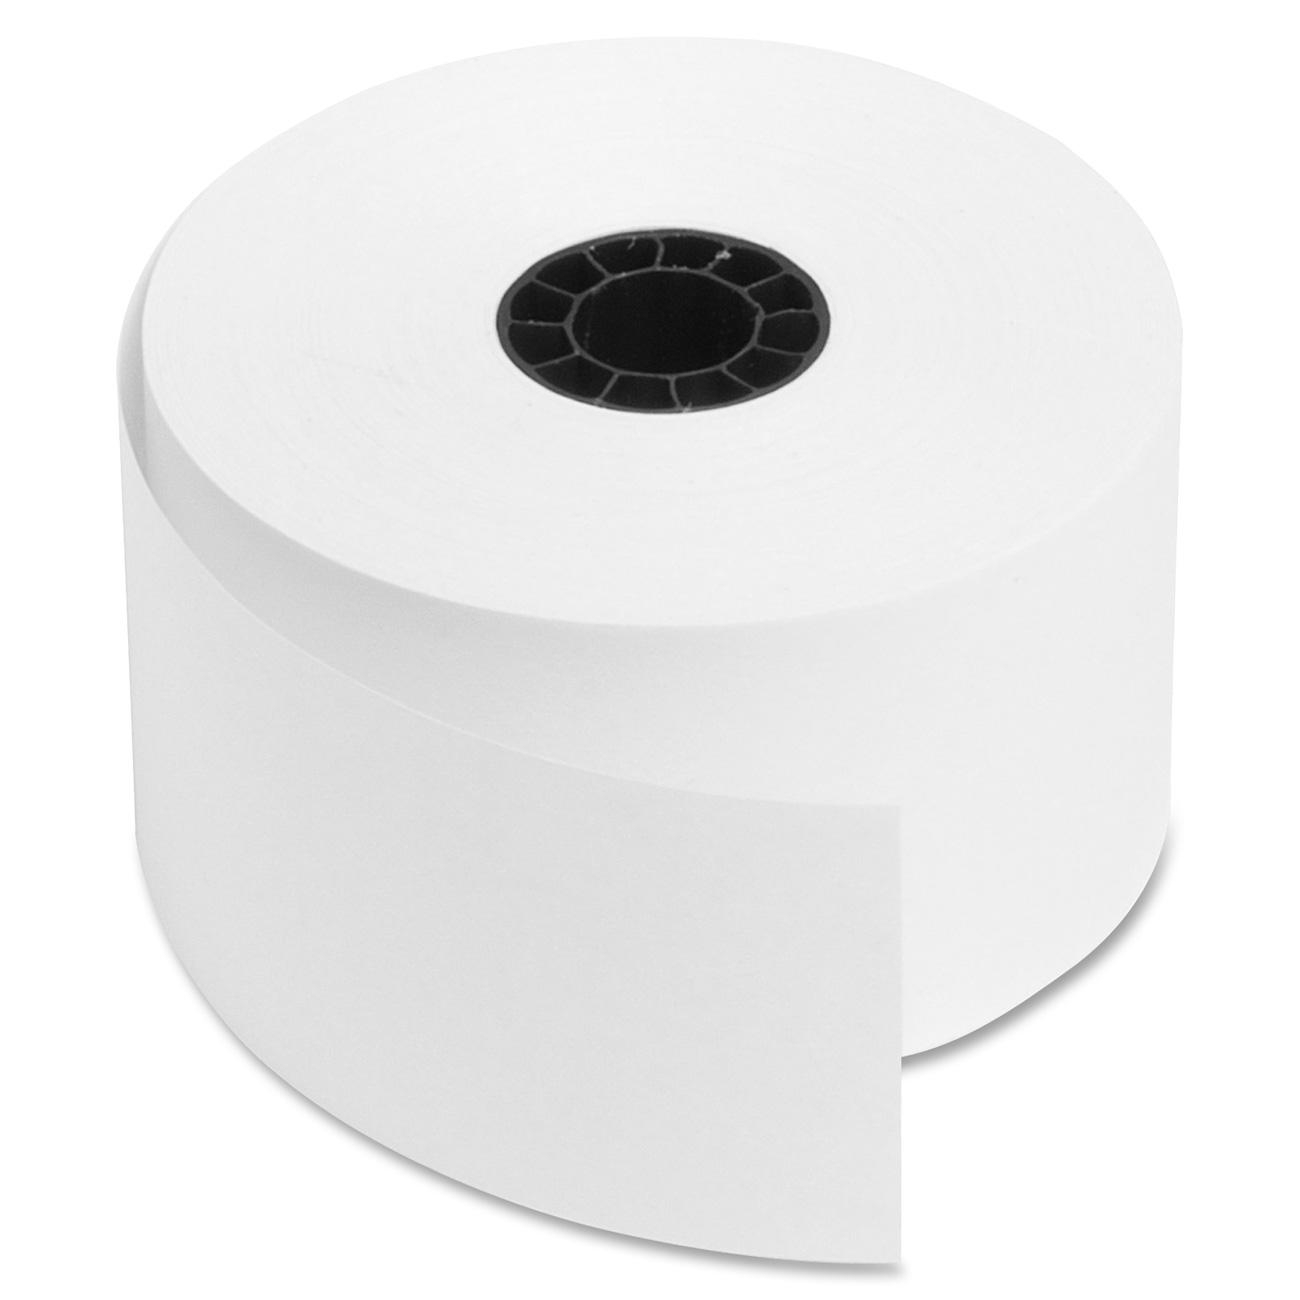 Sparco Electronic Cash Single Ply Register Rolls - image 2 of 3